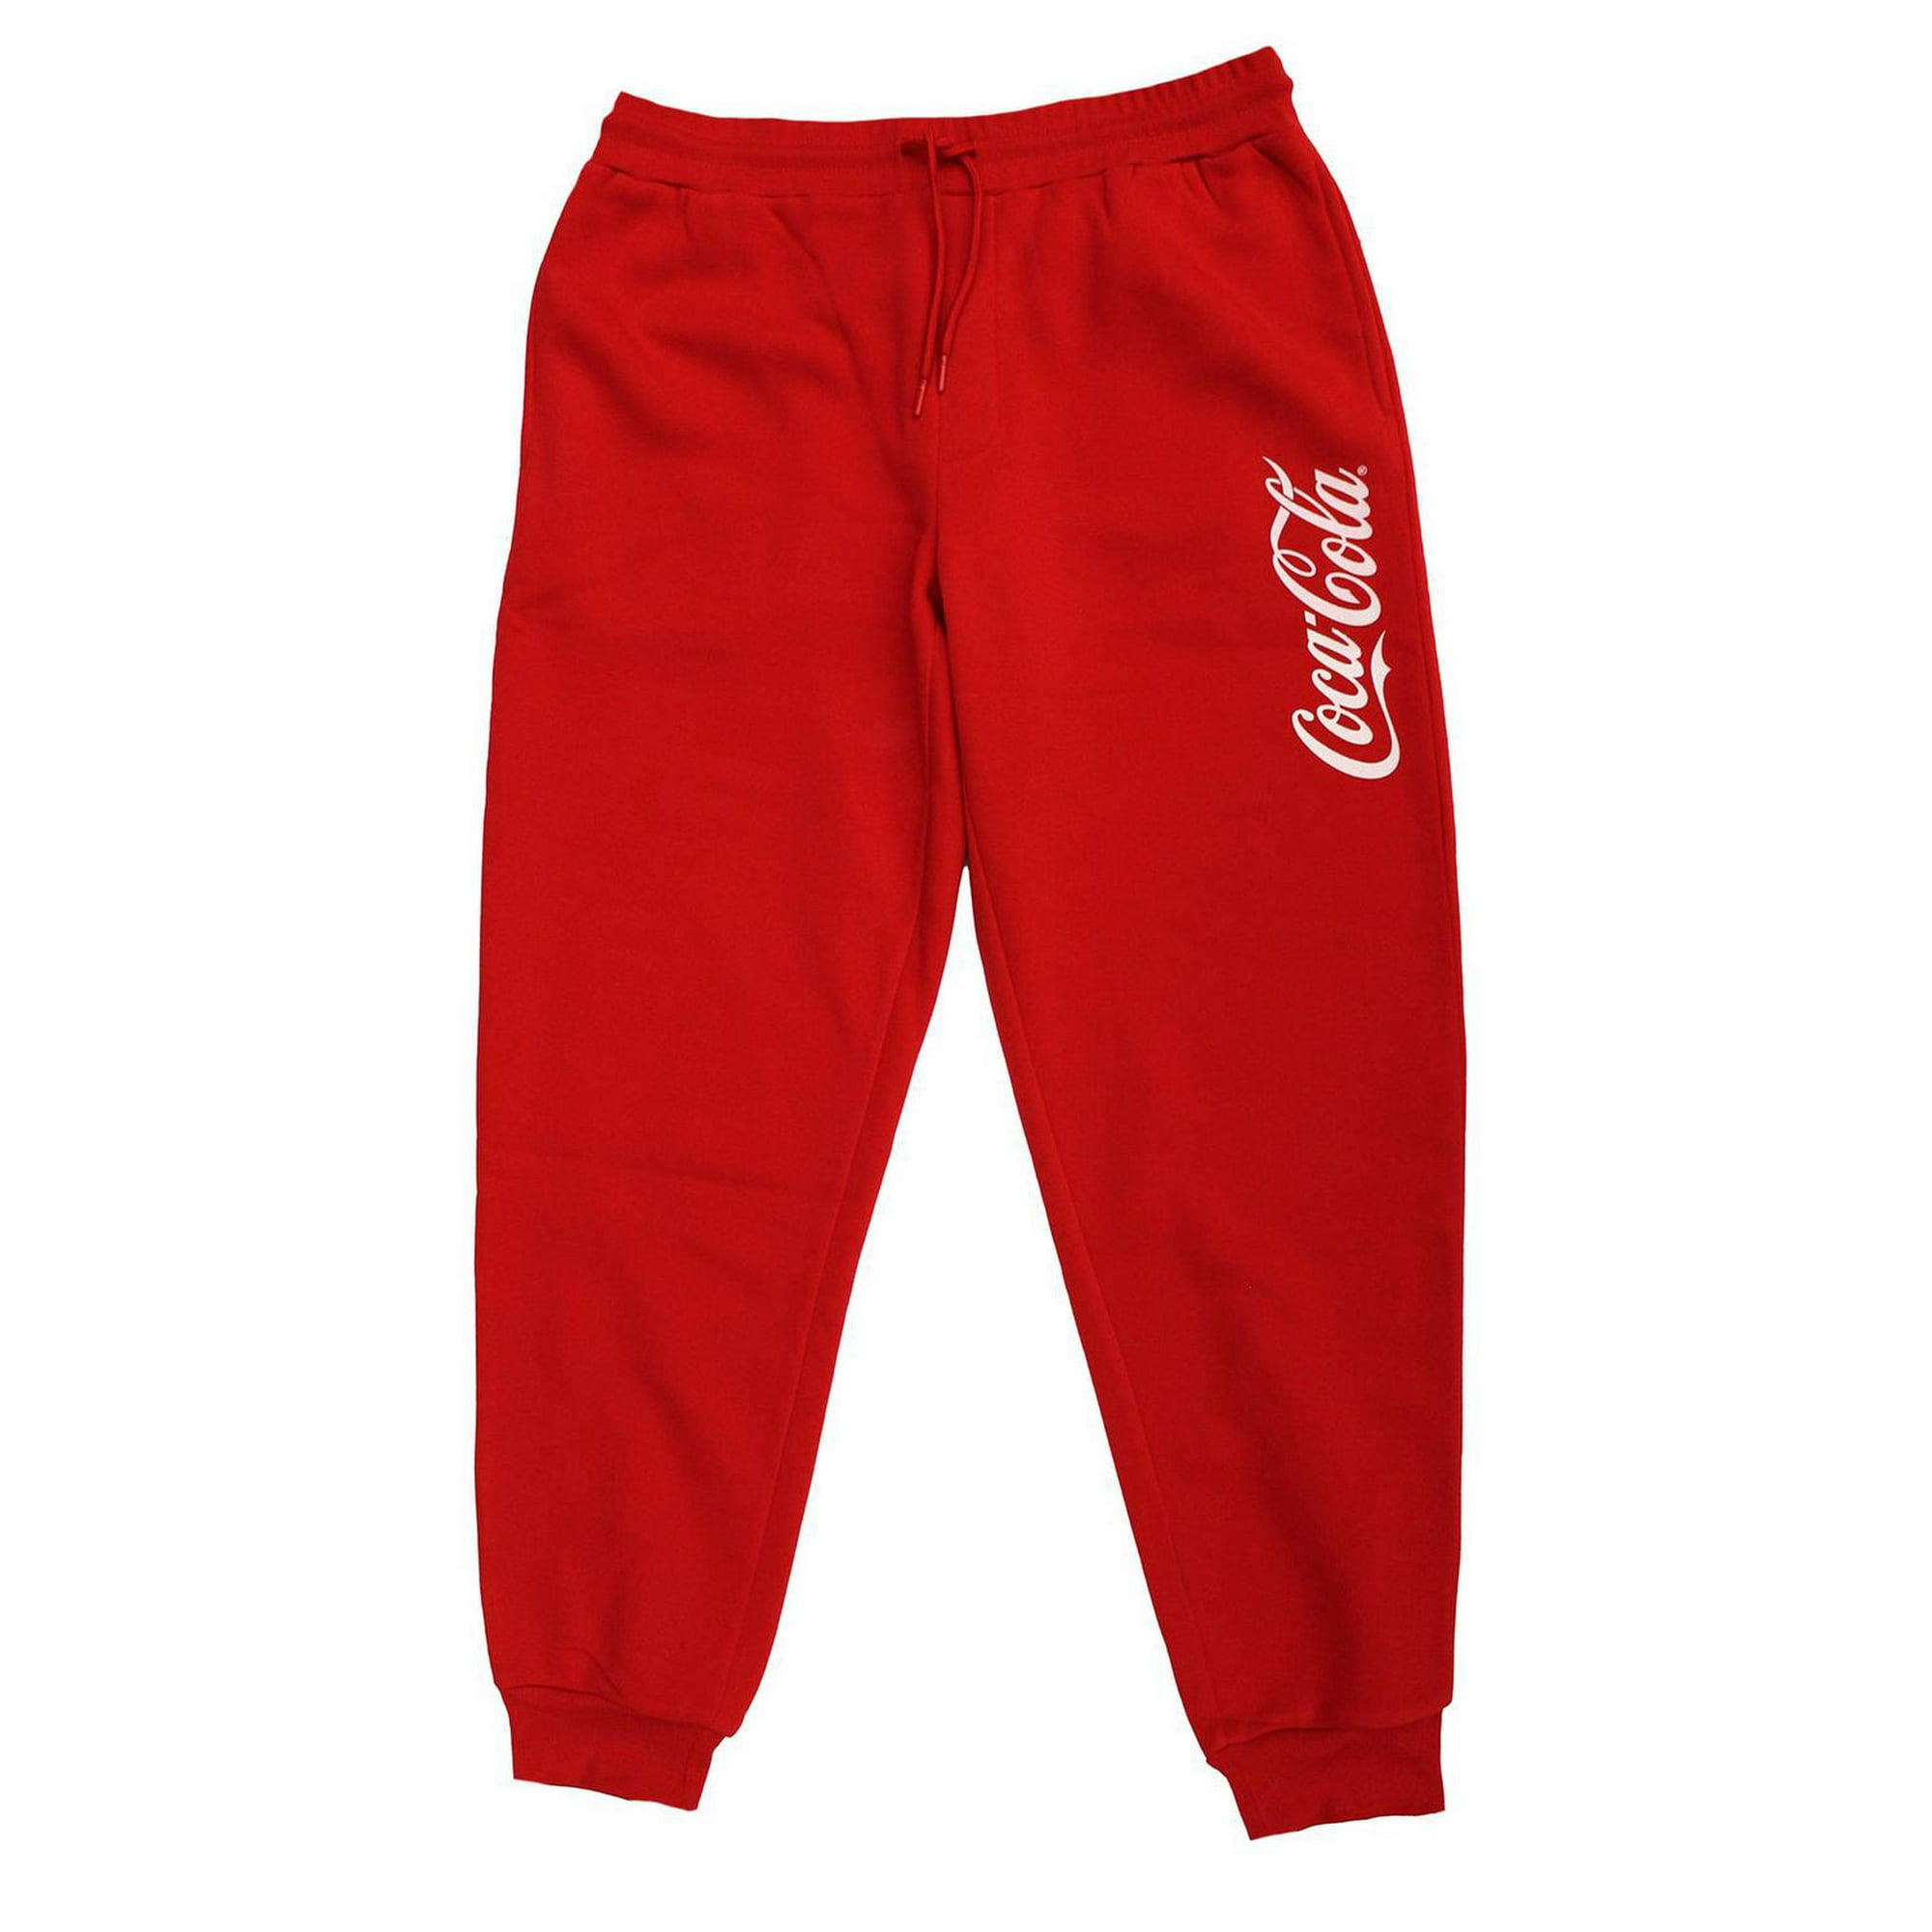 Coca Cola youth XL Red Sweatpants